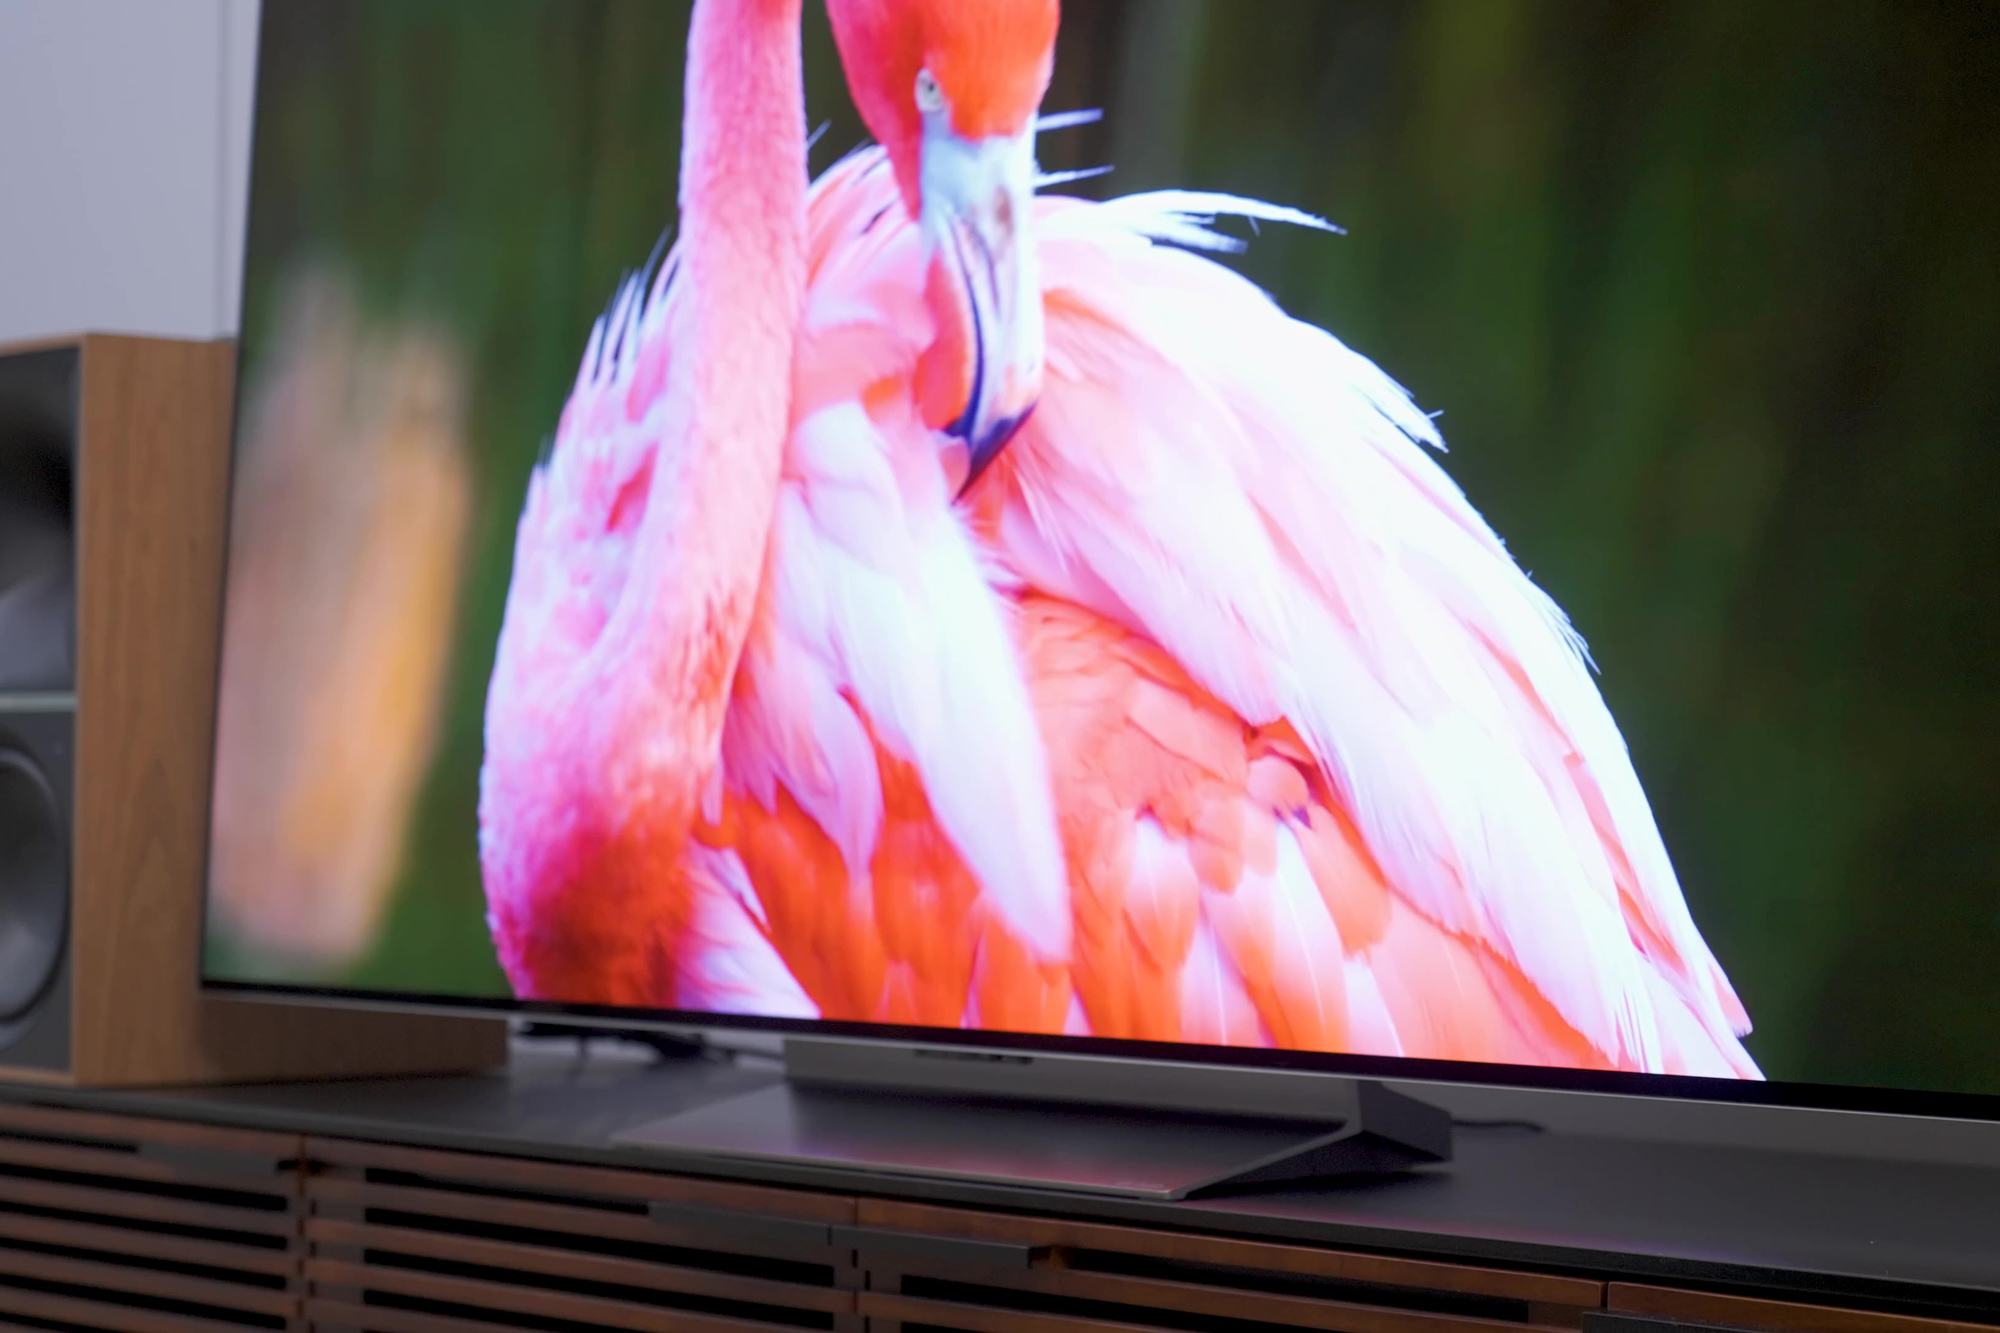 LG G3 Review: The Best OLED TV To Buy?